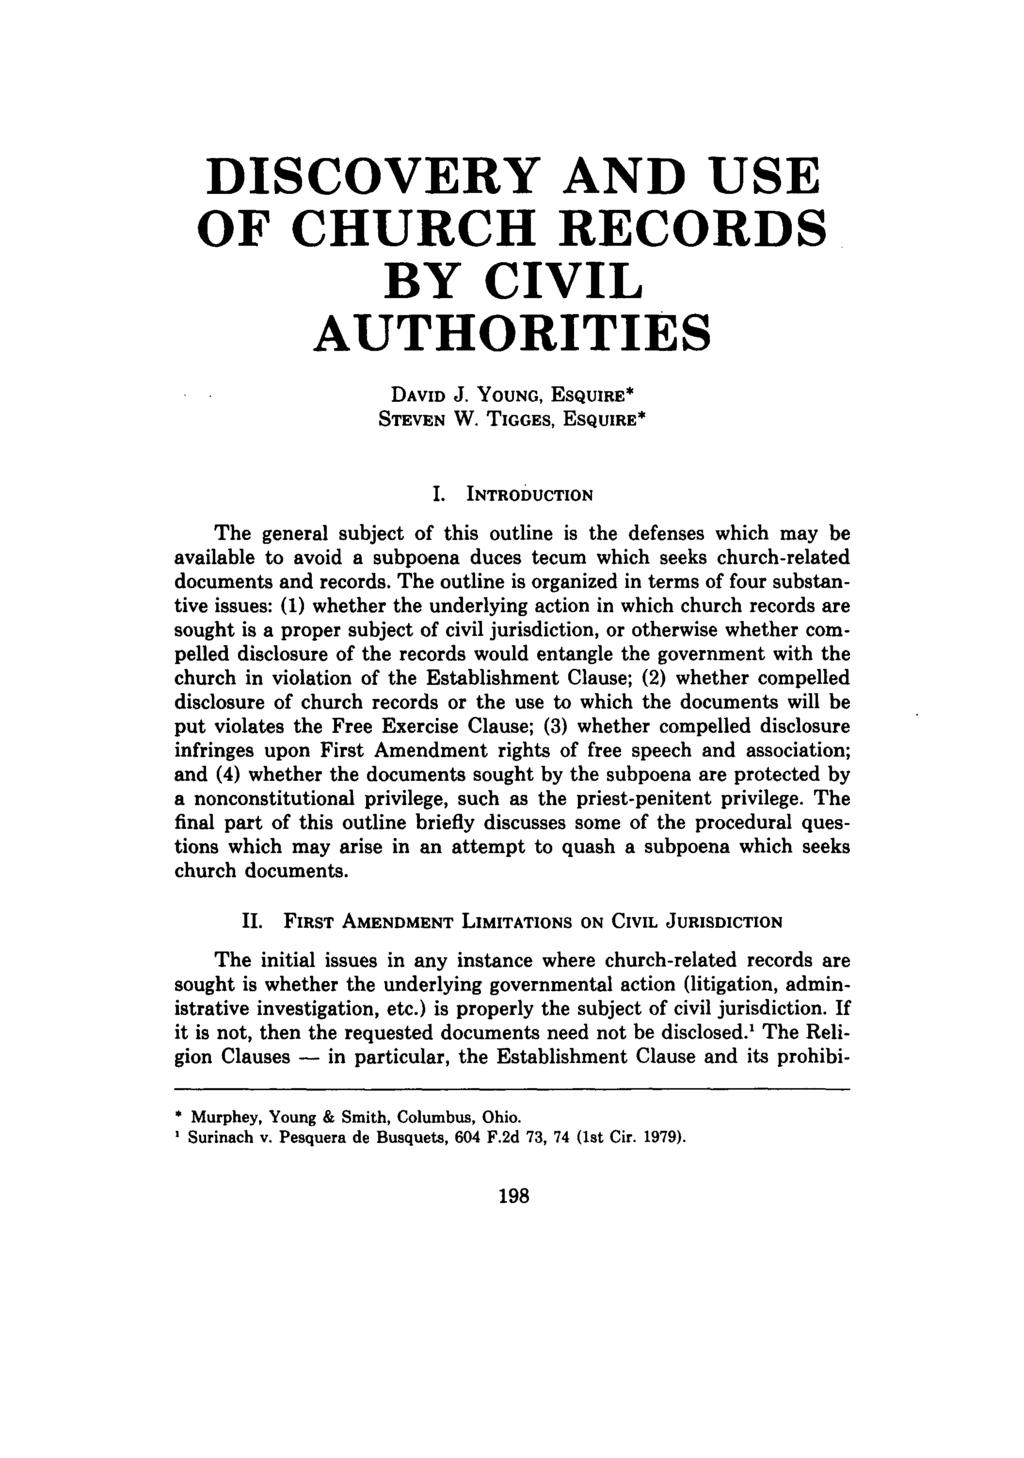 DISCOVERY AND USE OF CHURCH RECORDS BY CIVIL AUTHORITIES DAVID J. YOUNG, ESQUIRE* STEVEN W. TIGGES, ESQUIRE* I.